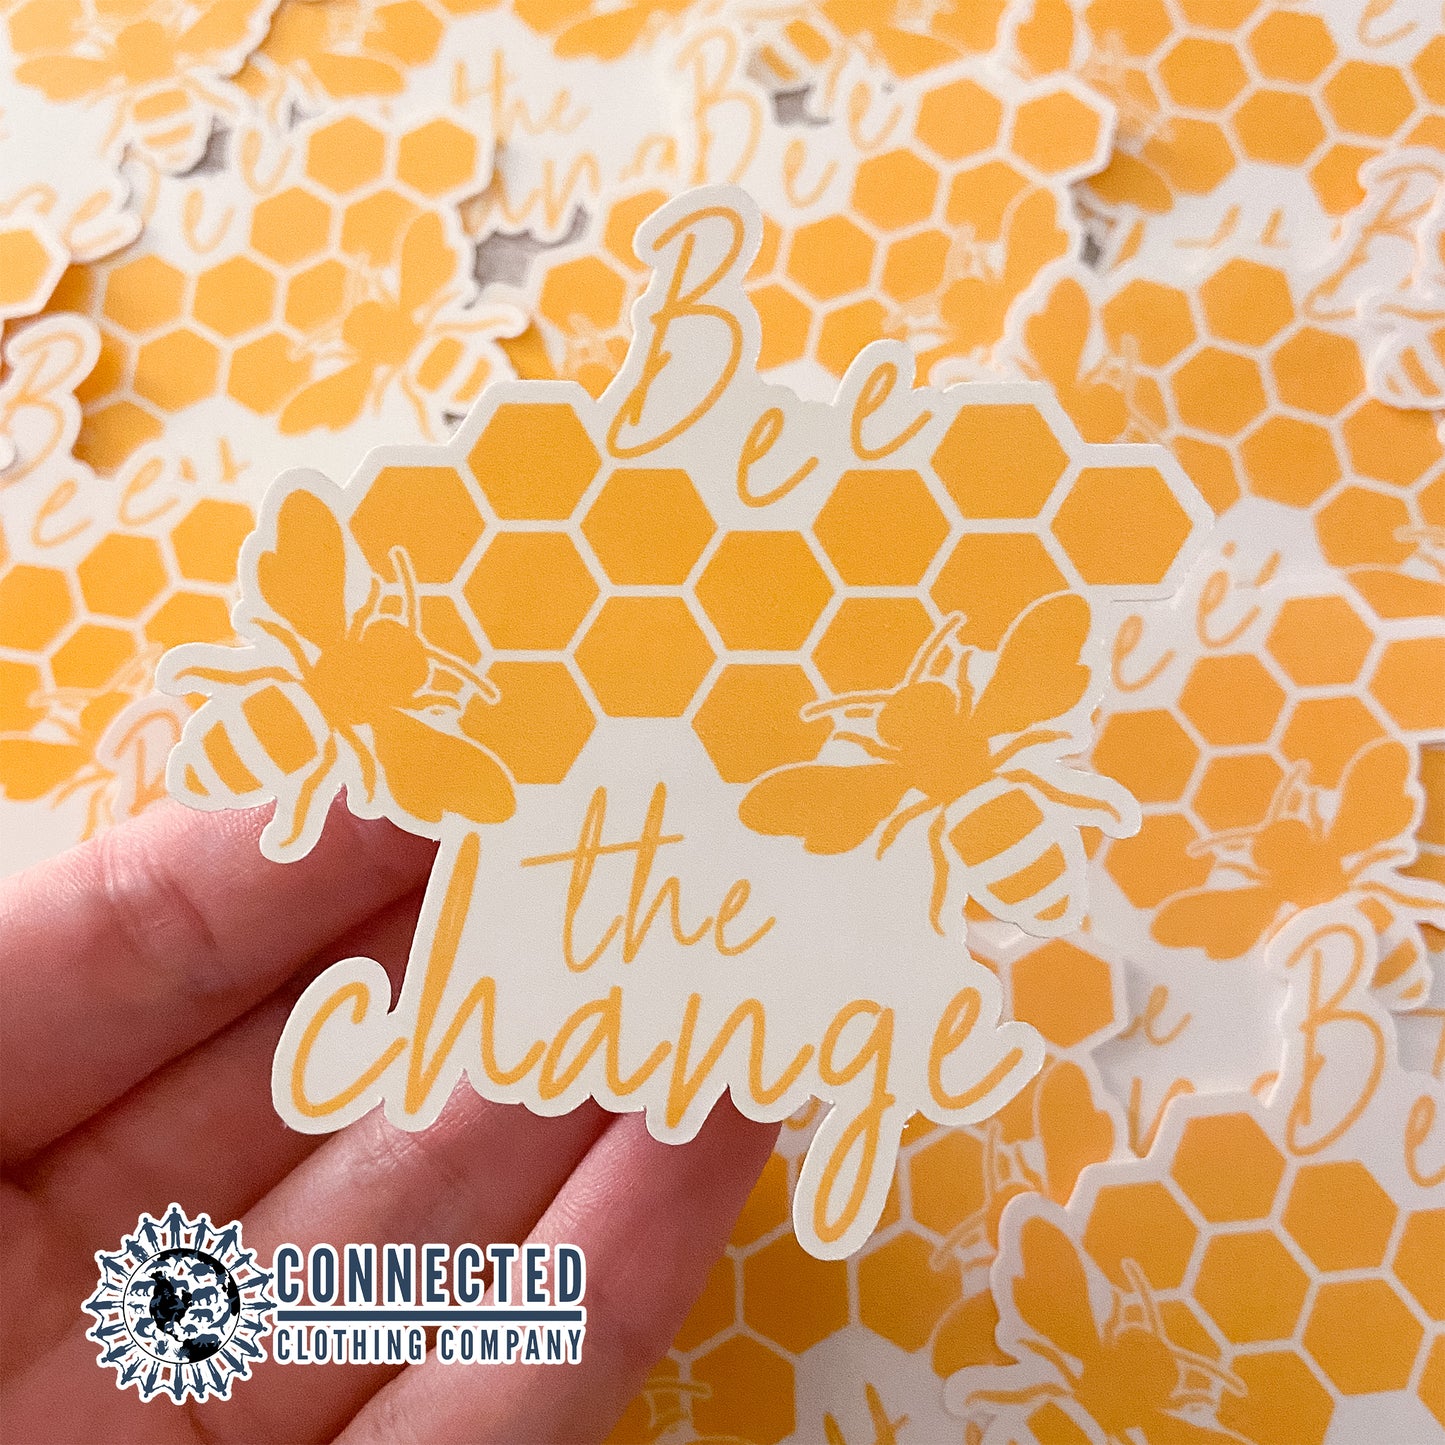 Bee The Change Sticker - Connected Clothing Company - 10% of profits donated to the Honeybee Conservancy